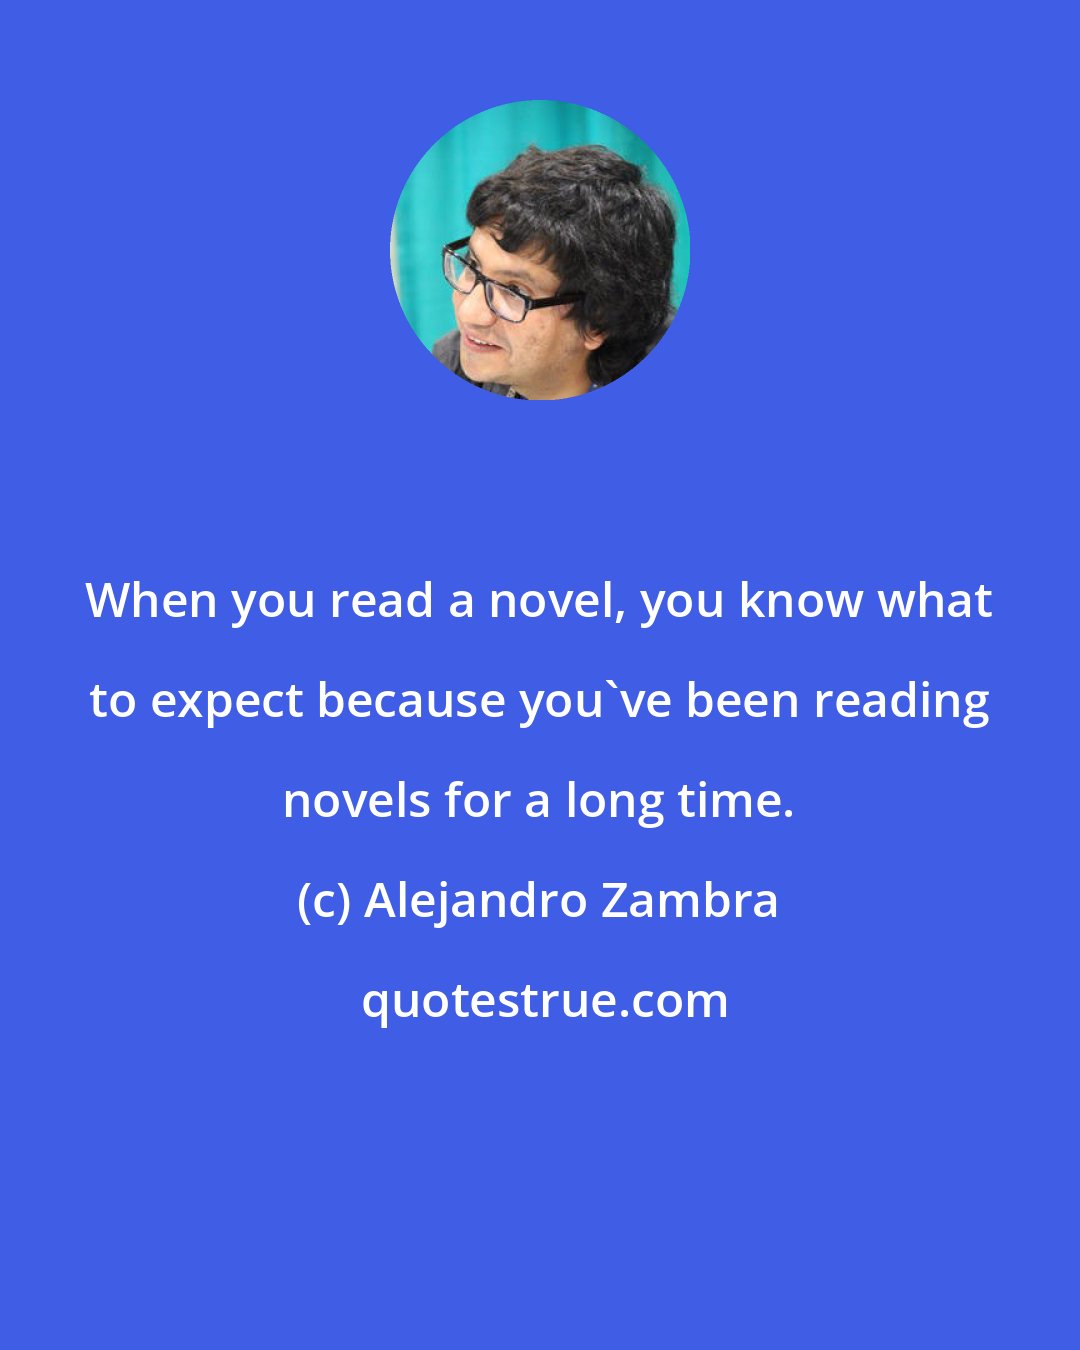 Alejandro Zambra: When you read a novel, you know what to expect because you've been reading novels for a long time.